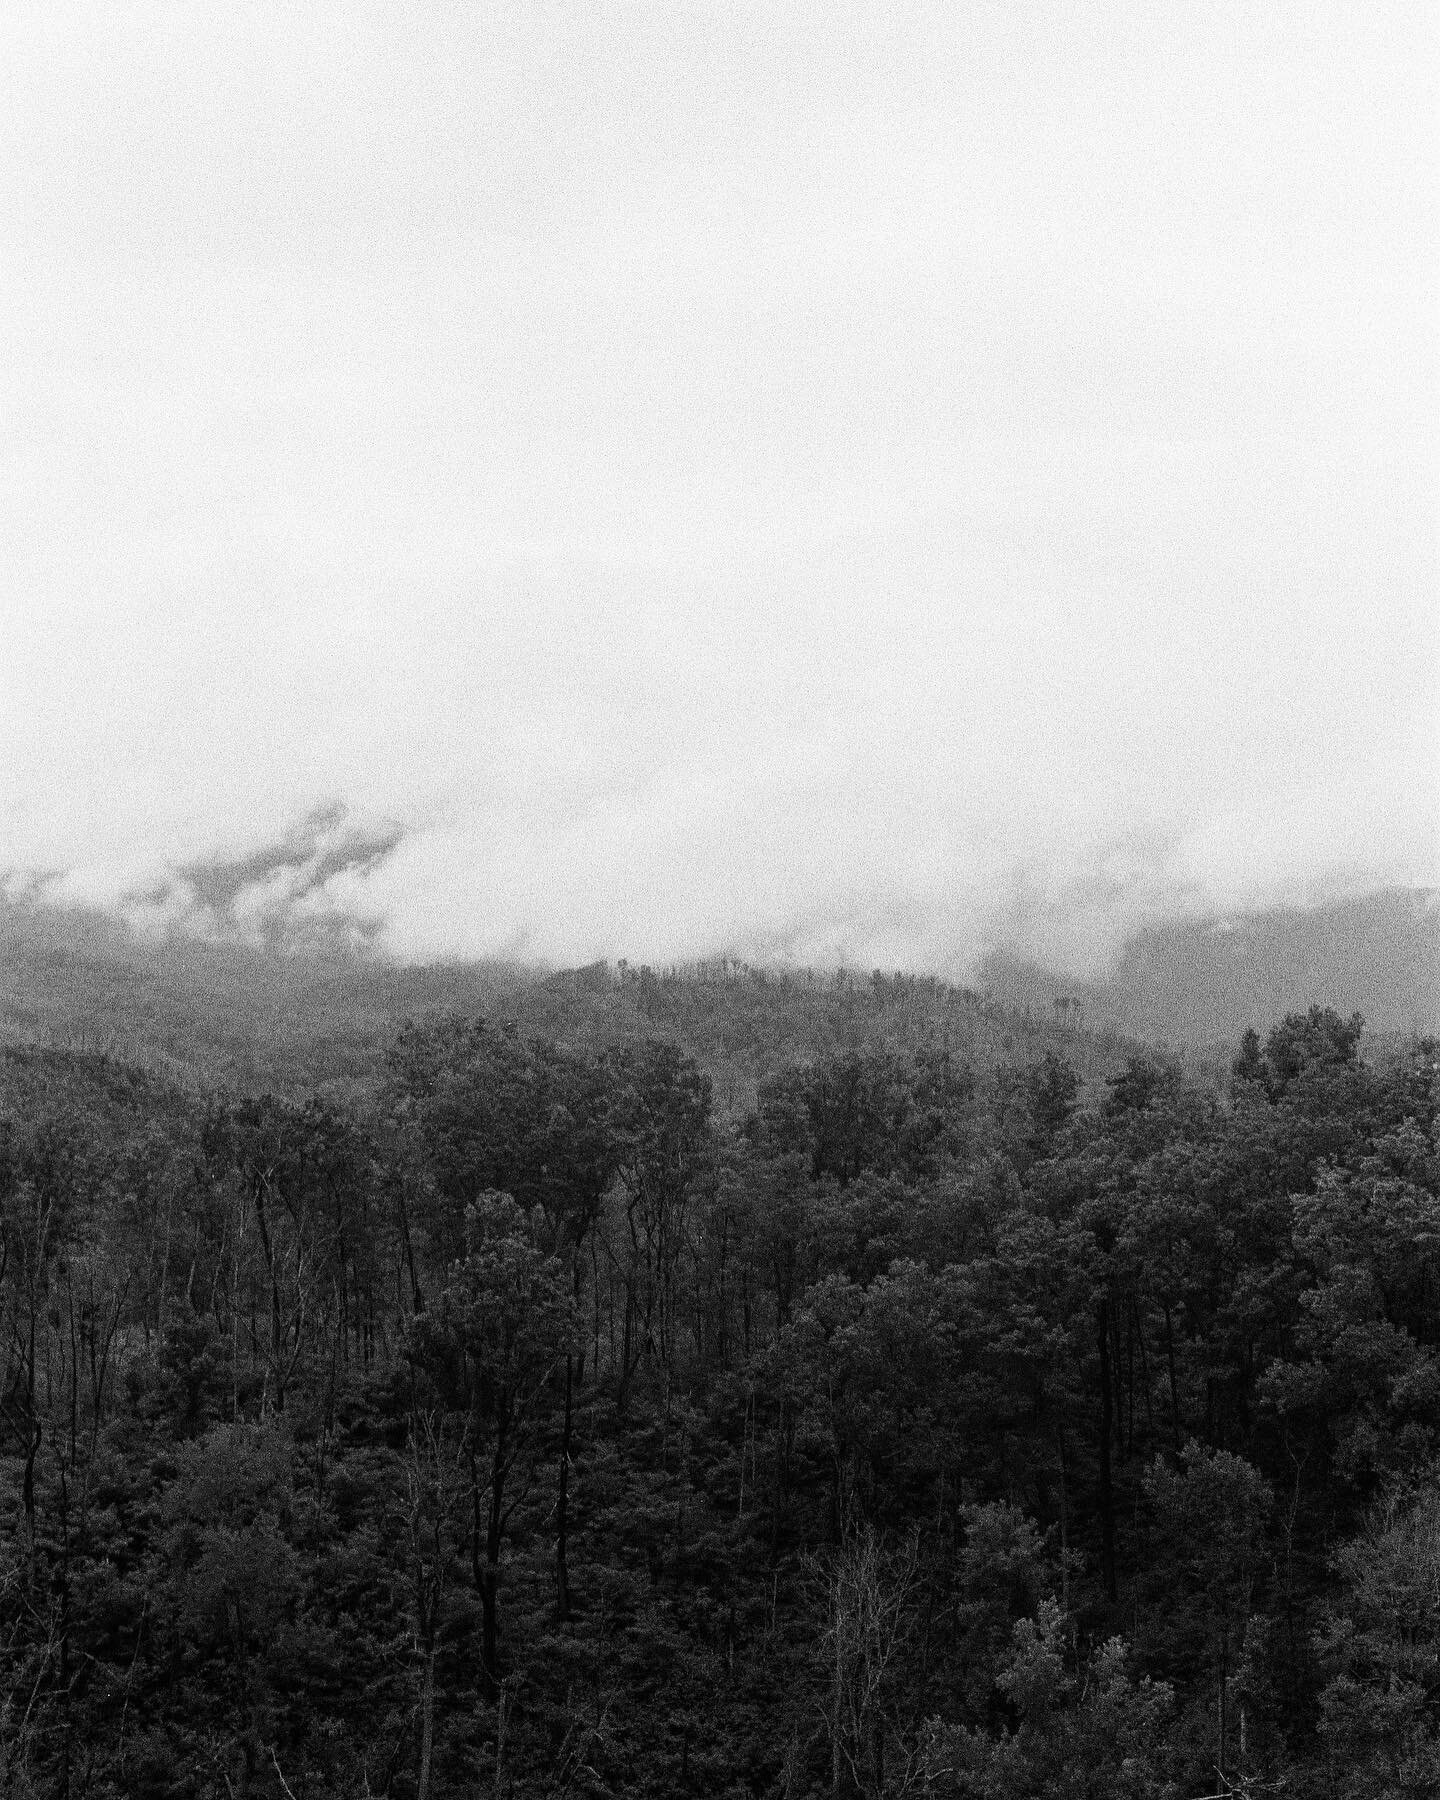 Long overdue for a mountain escape. 

Captured on Kodak 400 B&amp;W film 

Stay tuned for the rest of the scans.